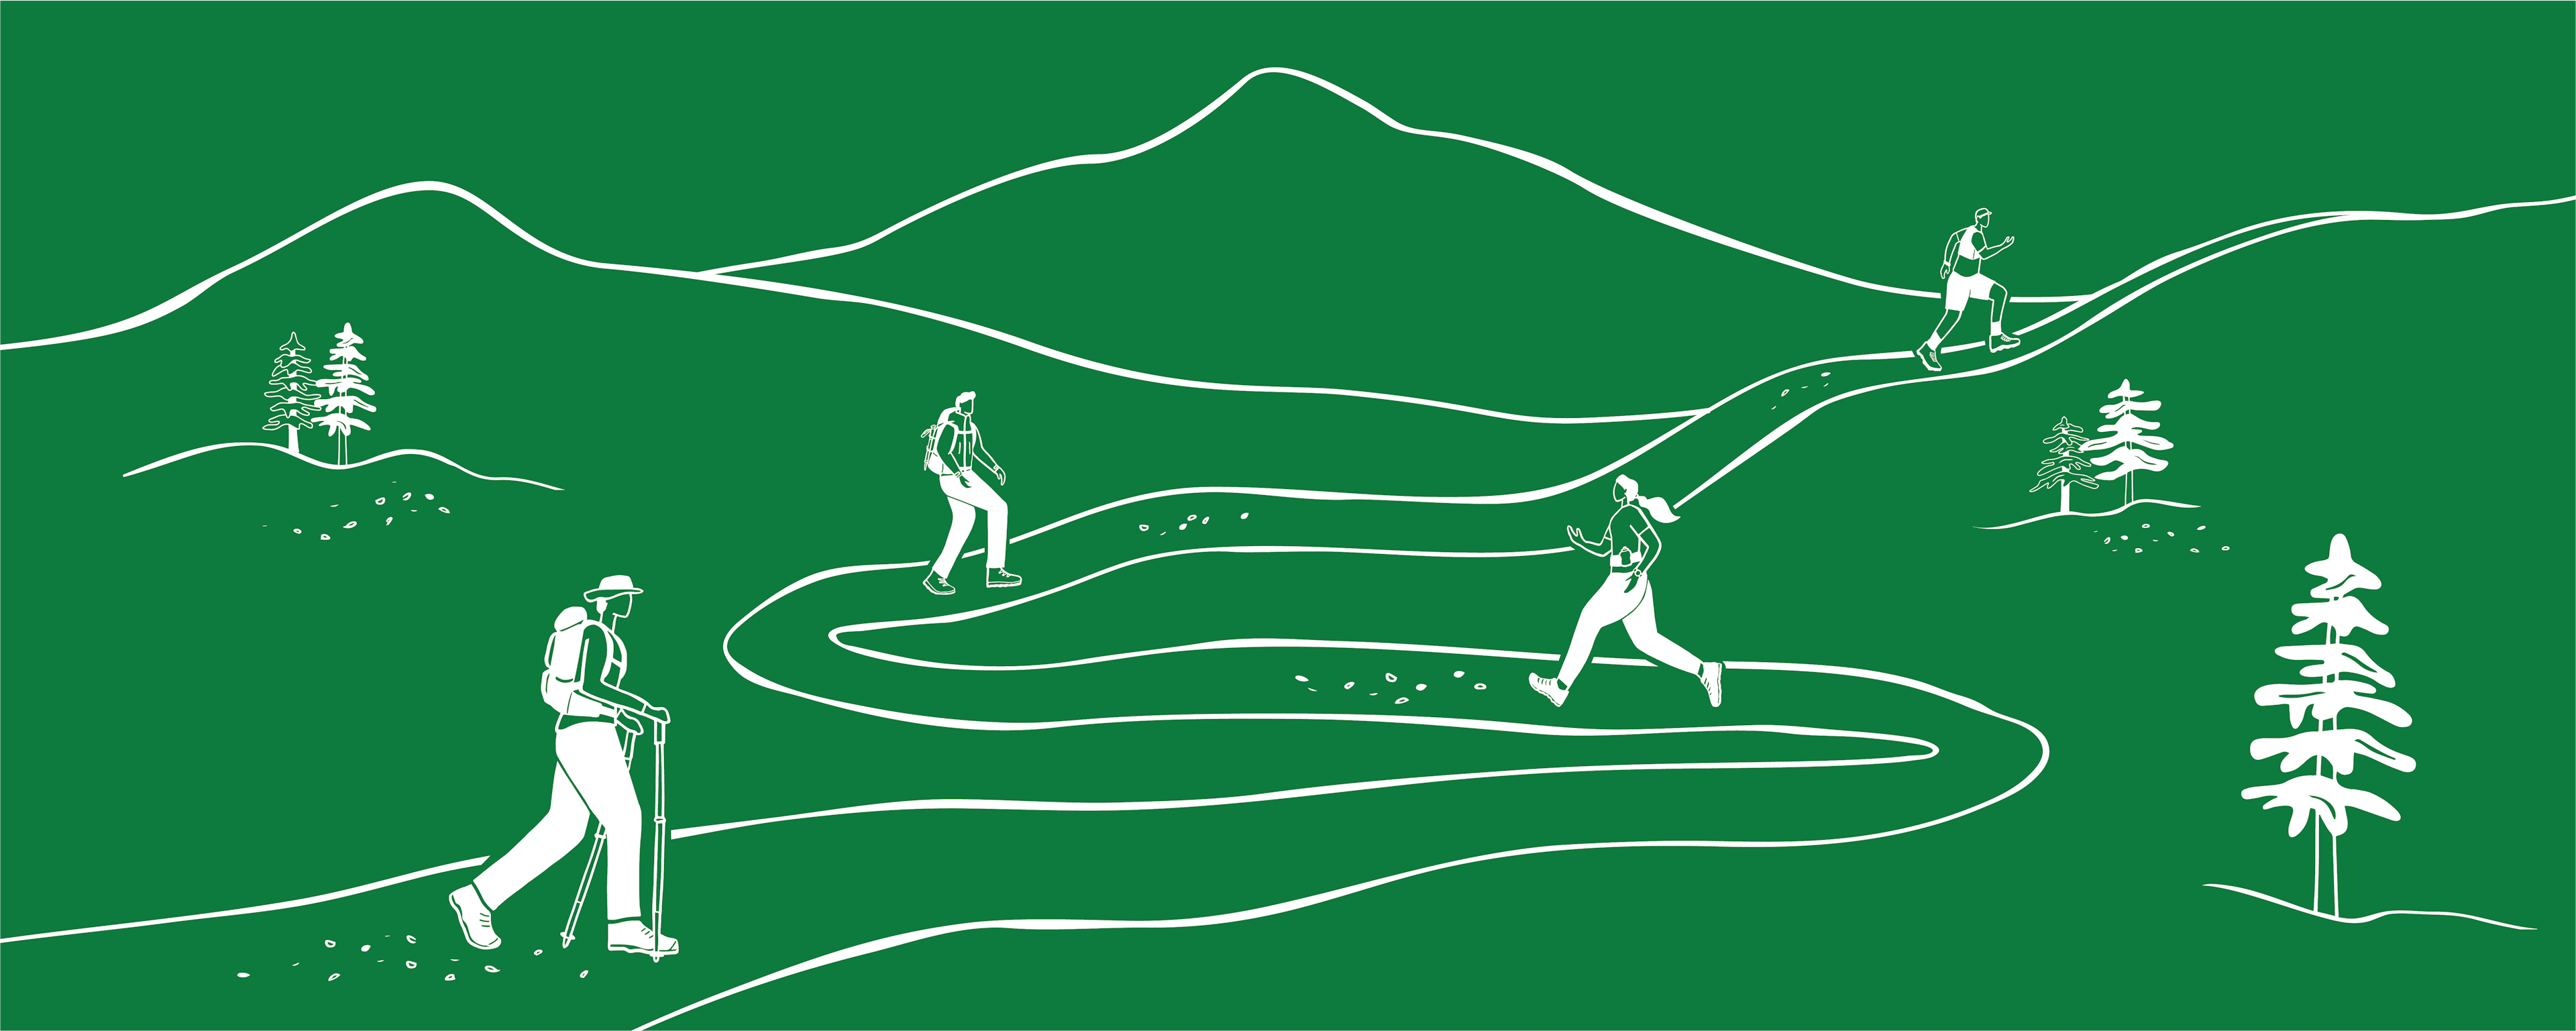 Illustration of hikers on a path with trees and a mountain